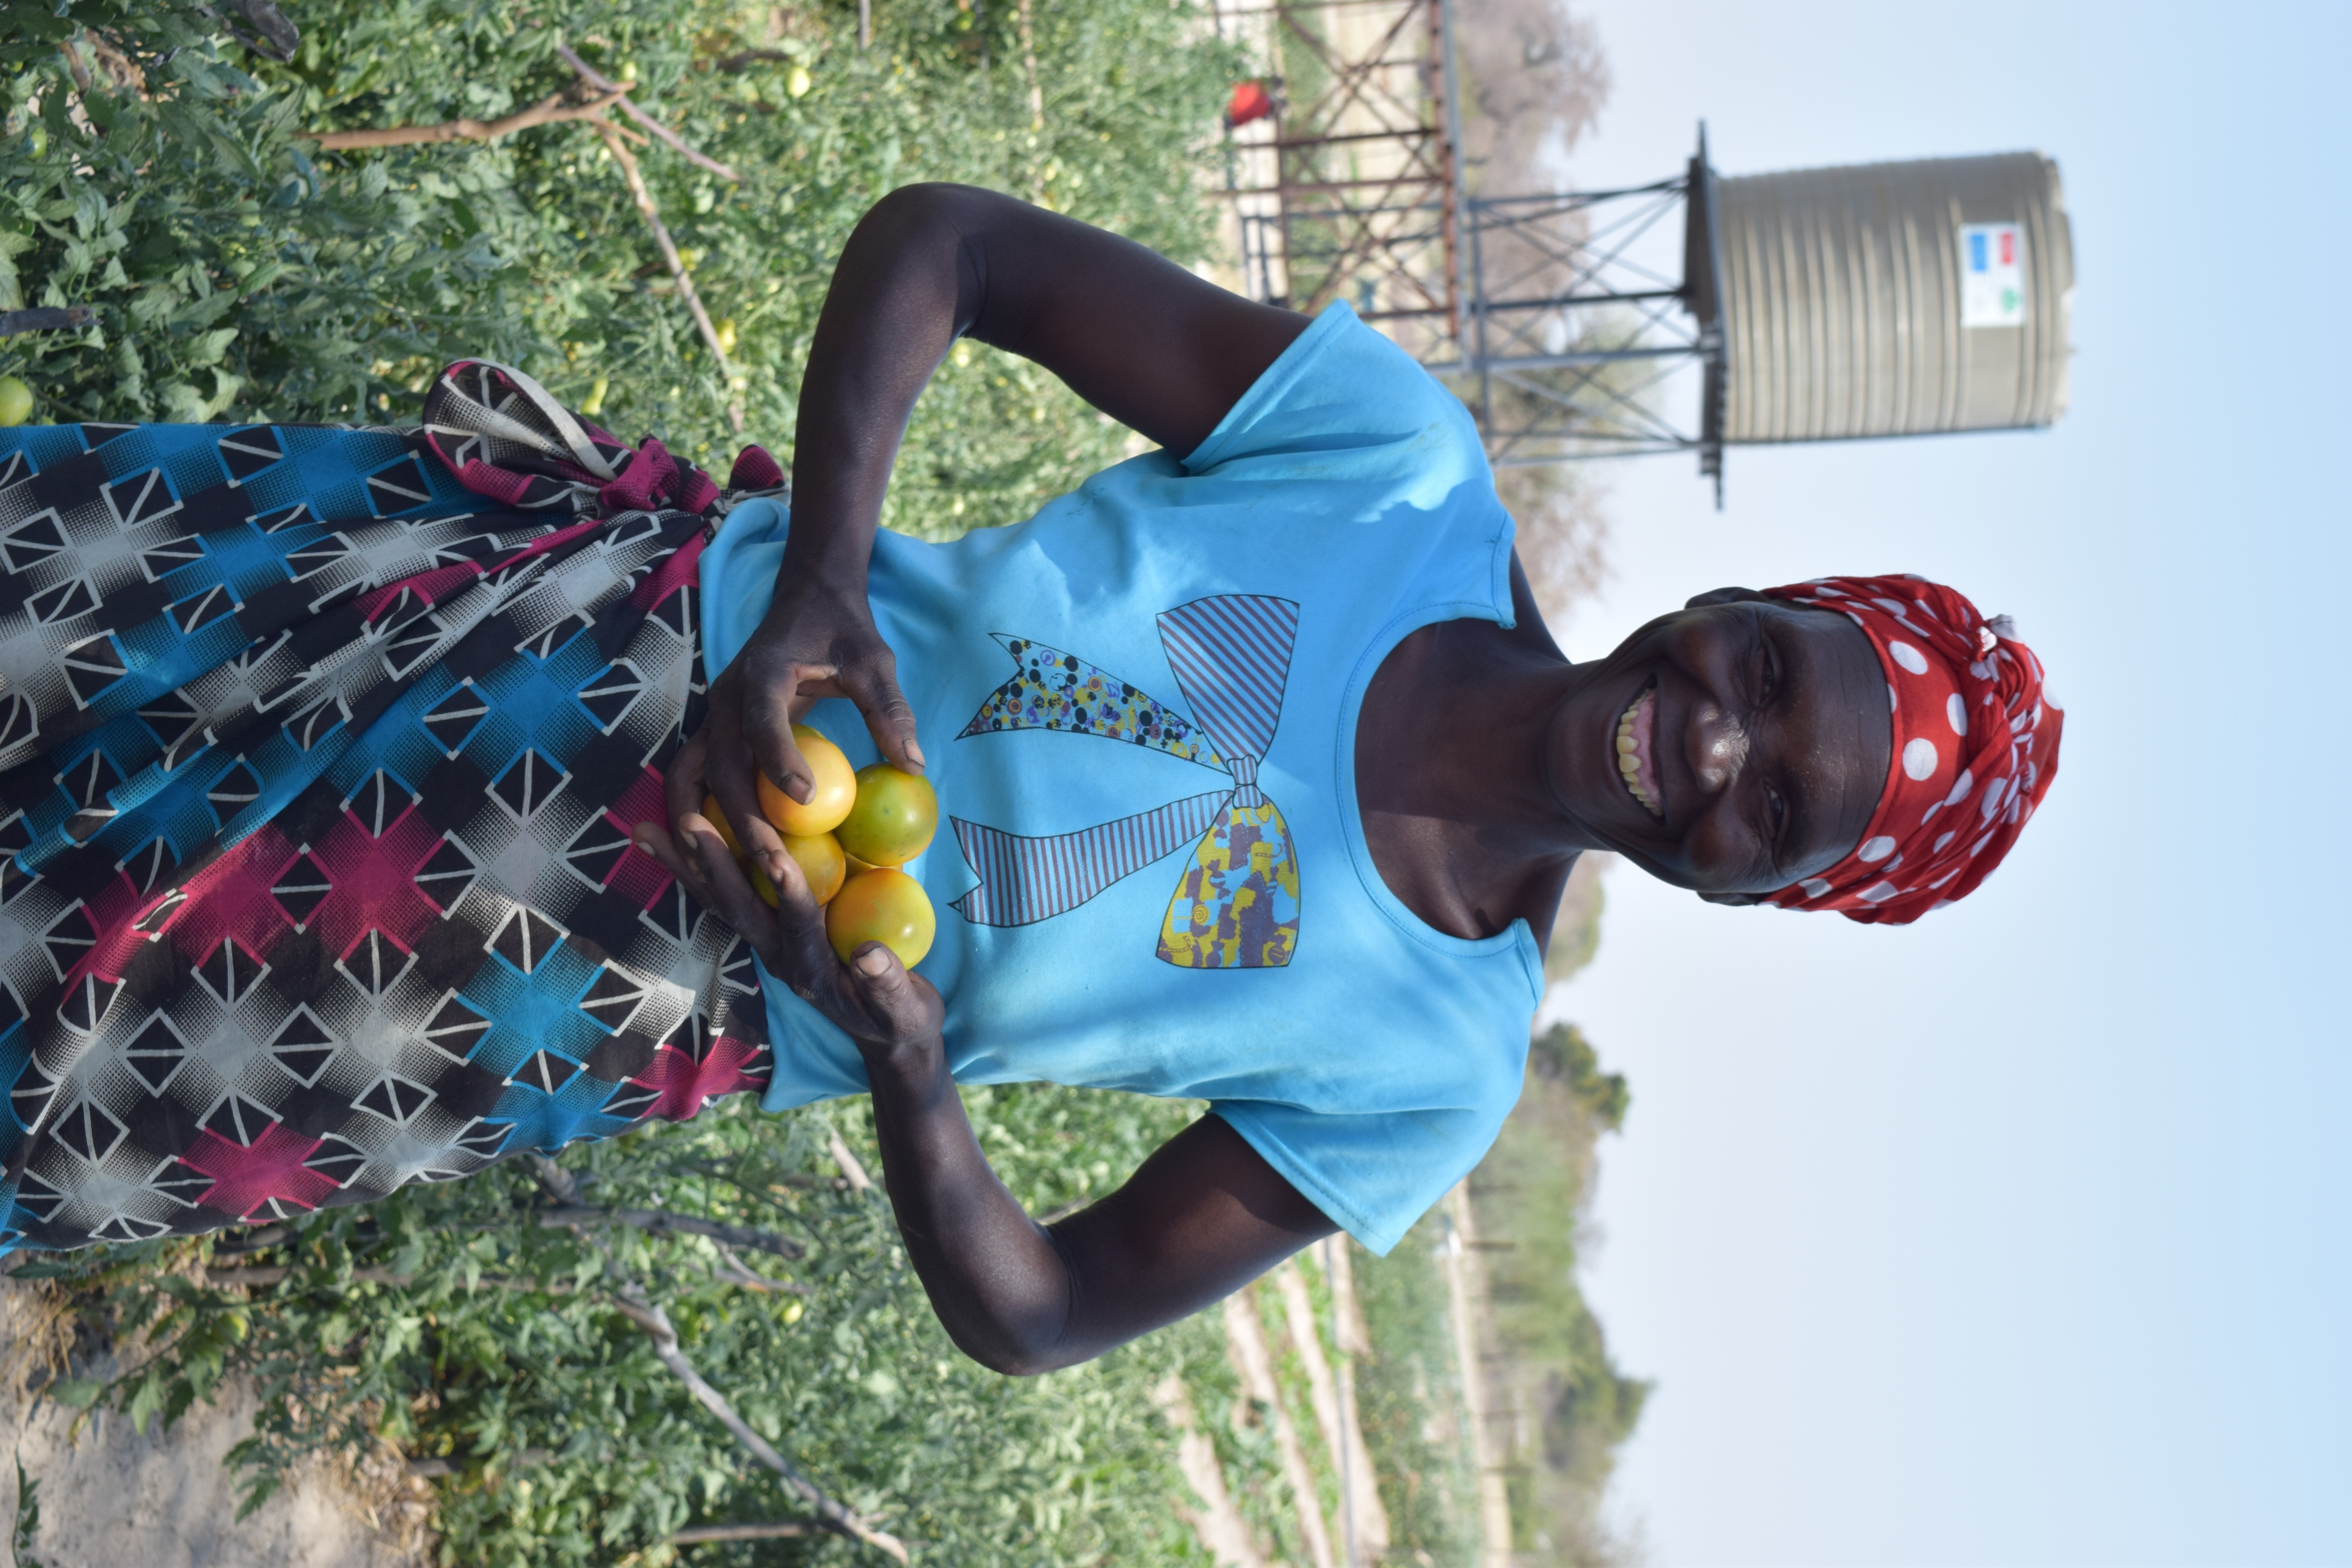 Farmers Clubs in Namibia empowered women be productive